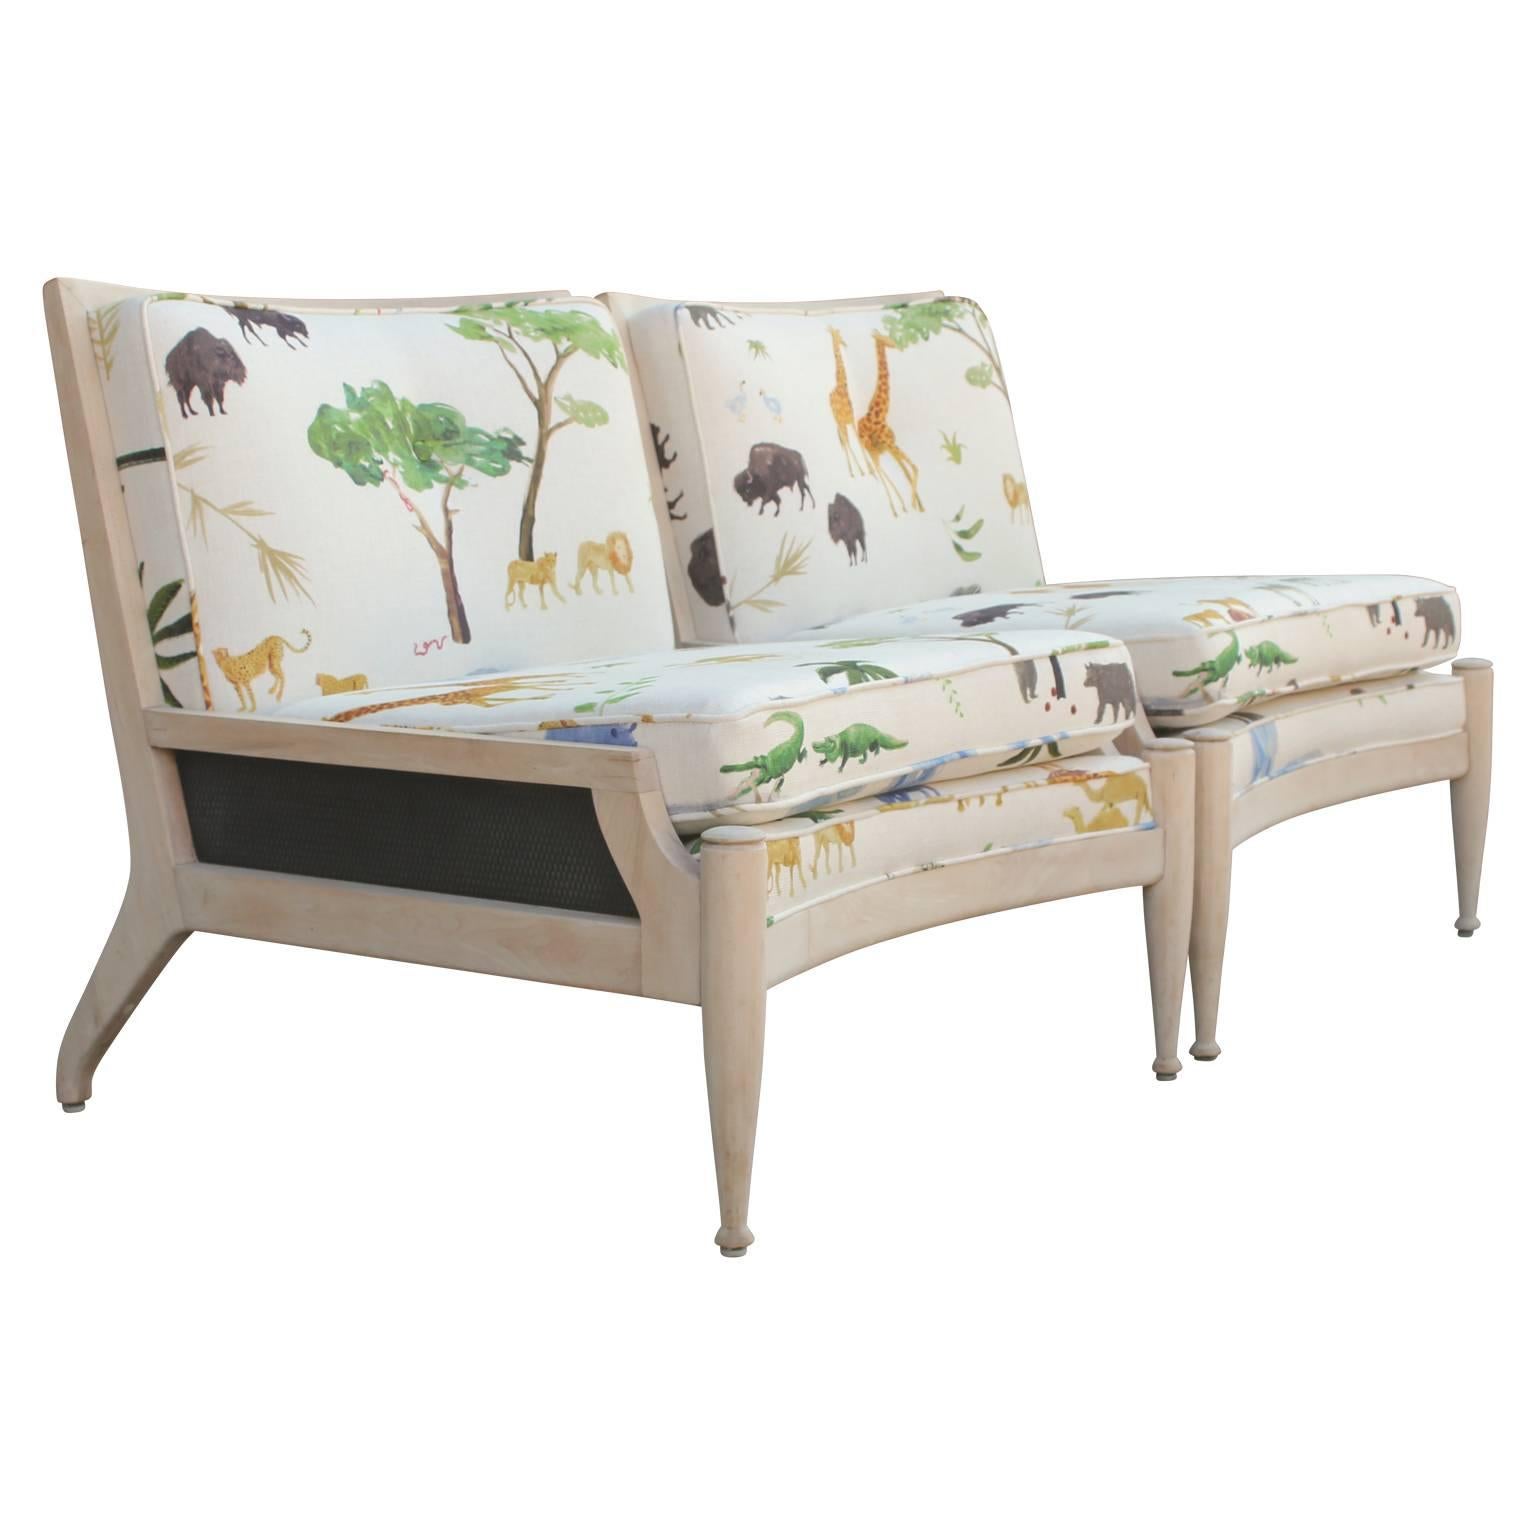 Mid-Century Modern Pair of Modern Bleached Wood Cane Lounge Chairs in Colorful Jungle Animal Print